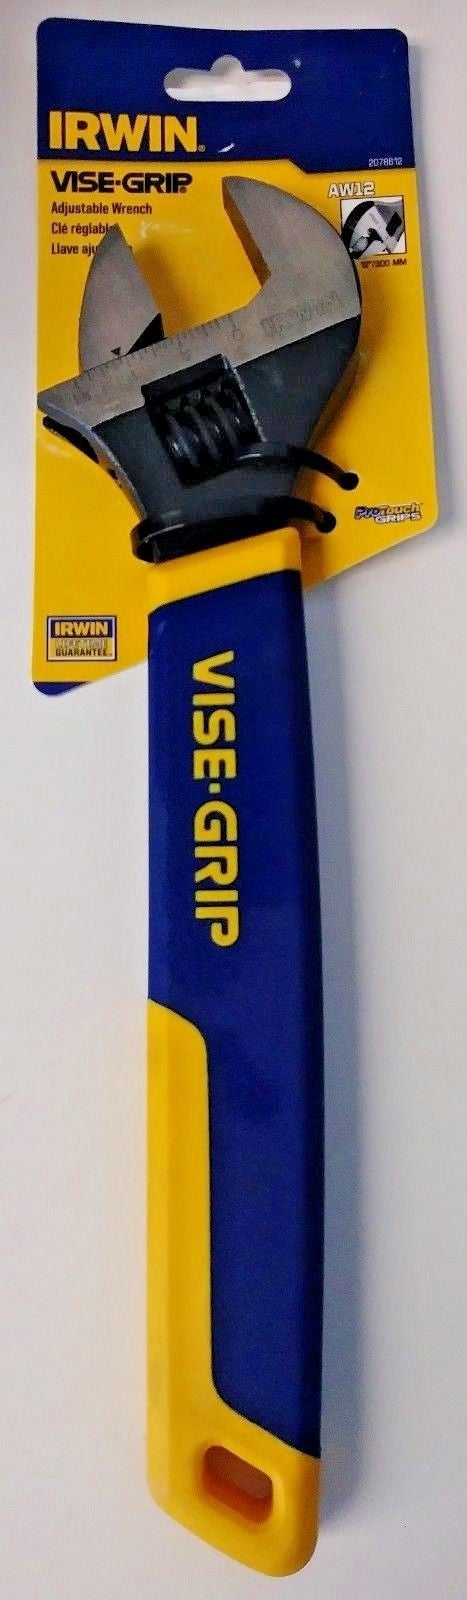 Irwin Vise-Grip 2078612 12" Adjustable Wrench AW12